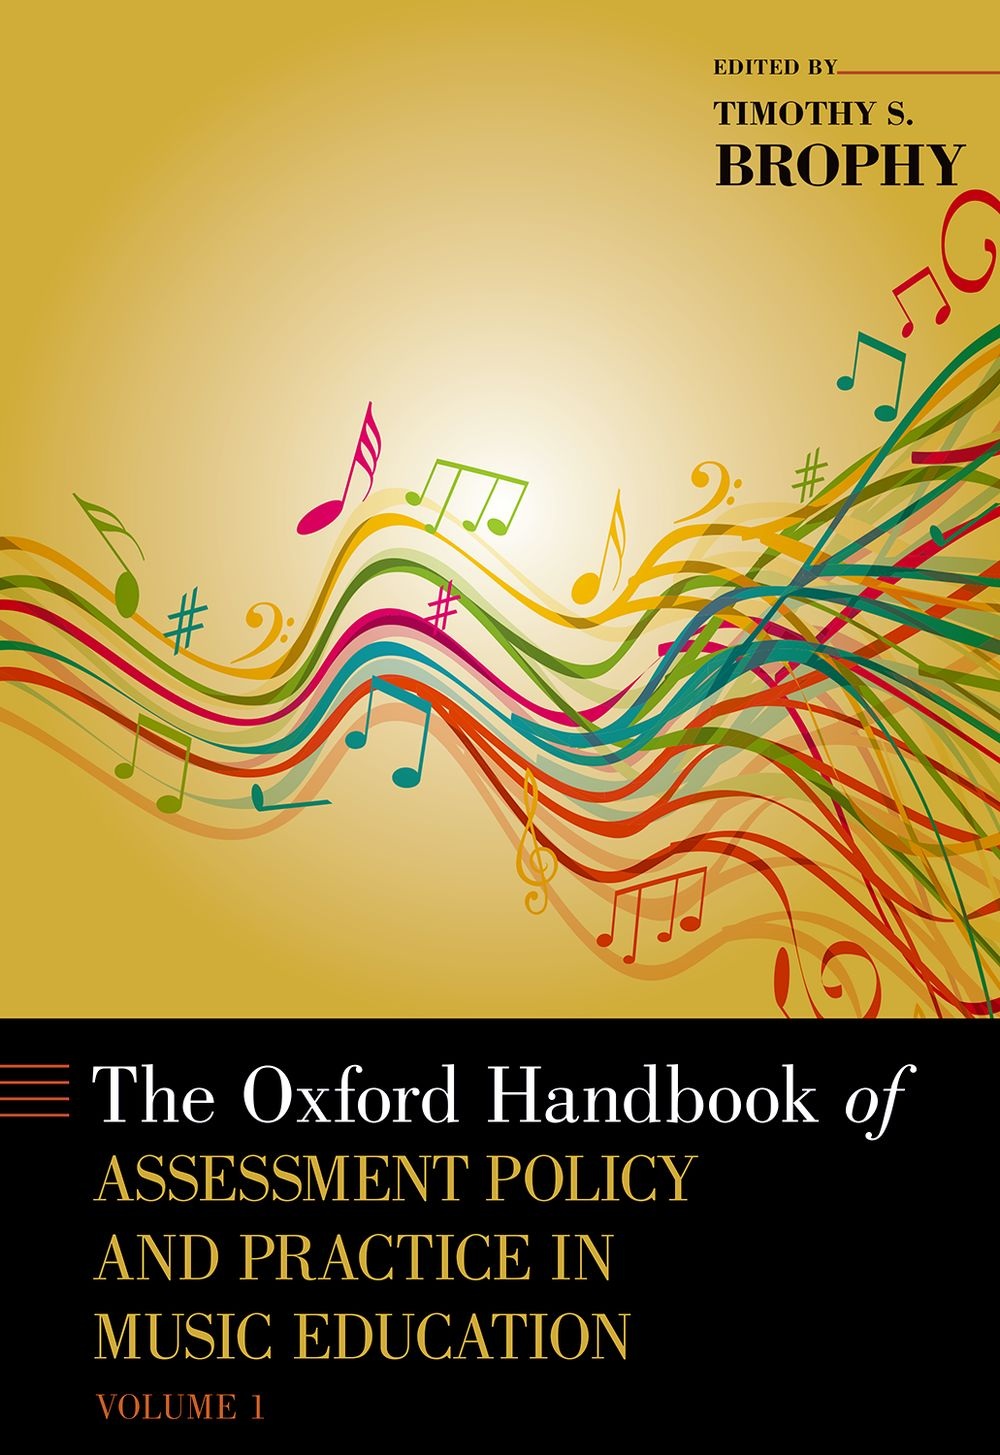 The Oxford Handbook of Assessment Policy  Vol. 1: Reference